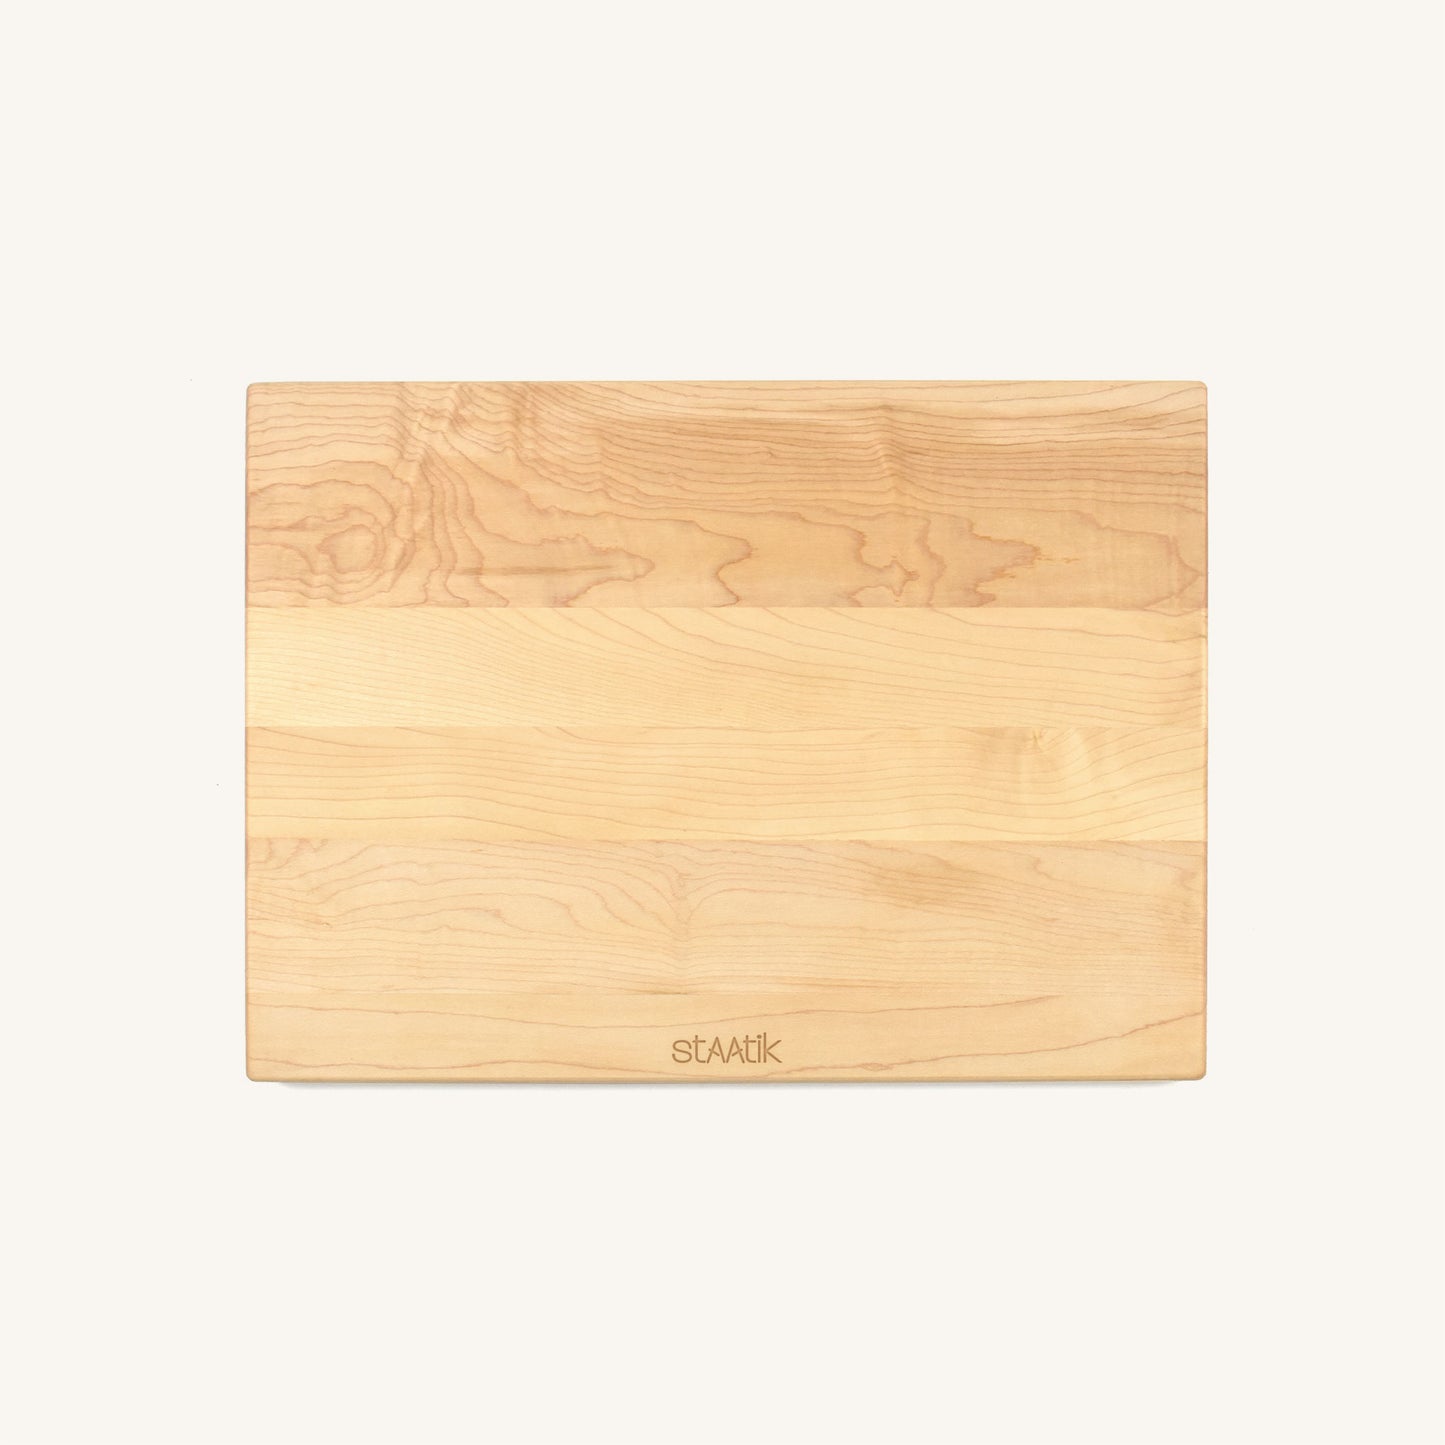 Wood Cutting Board with Rounded Corners and Edges